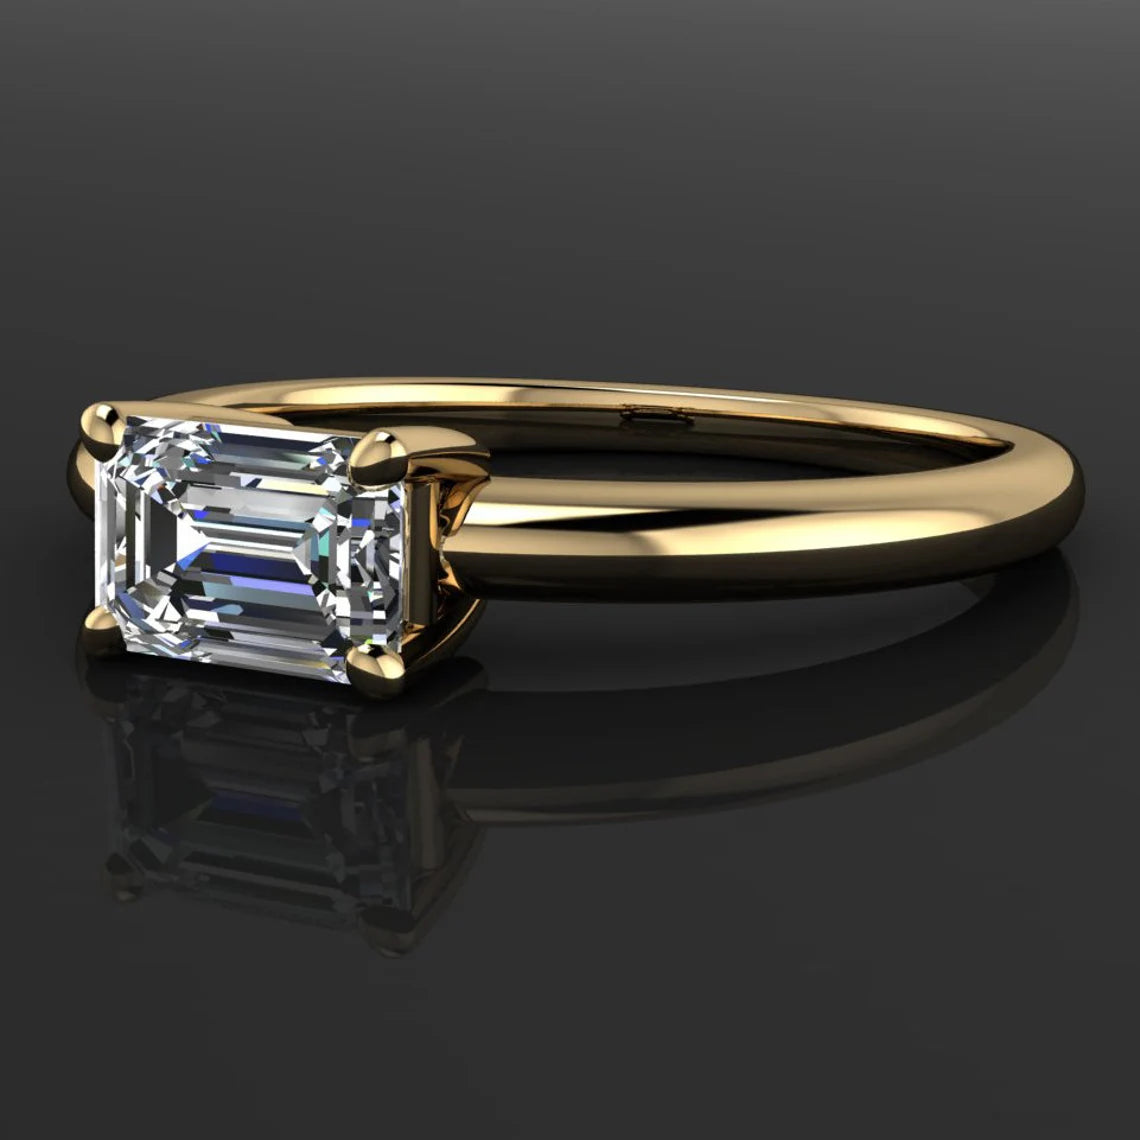 india ring – emerald cut NEO moissanite ring, east west ring - J Hollywood Designs